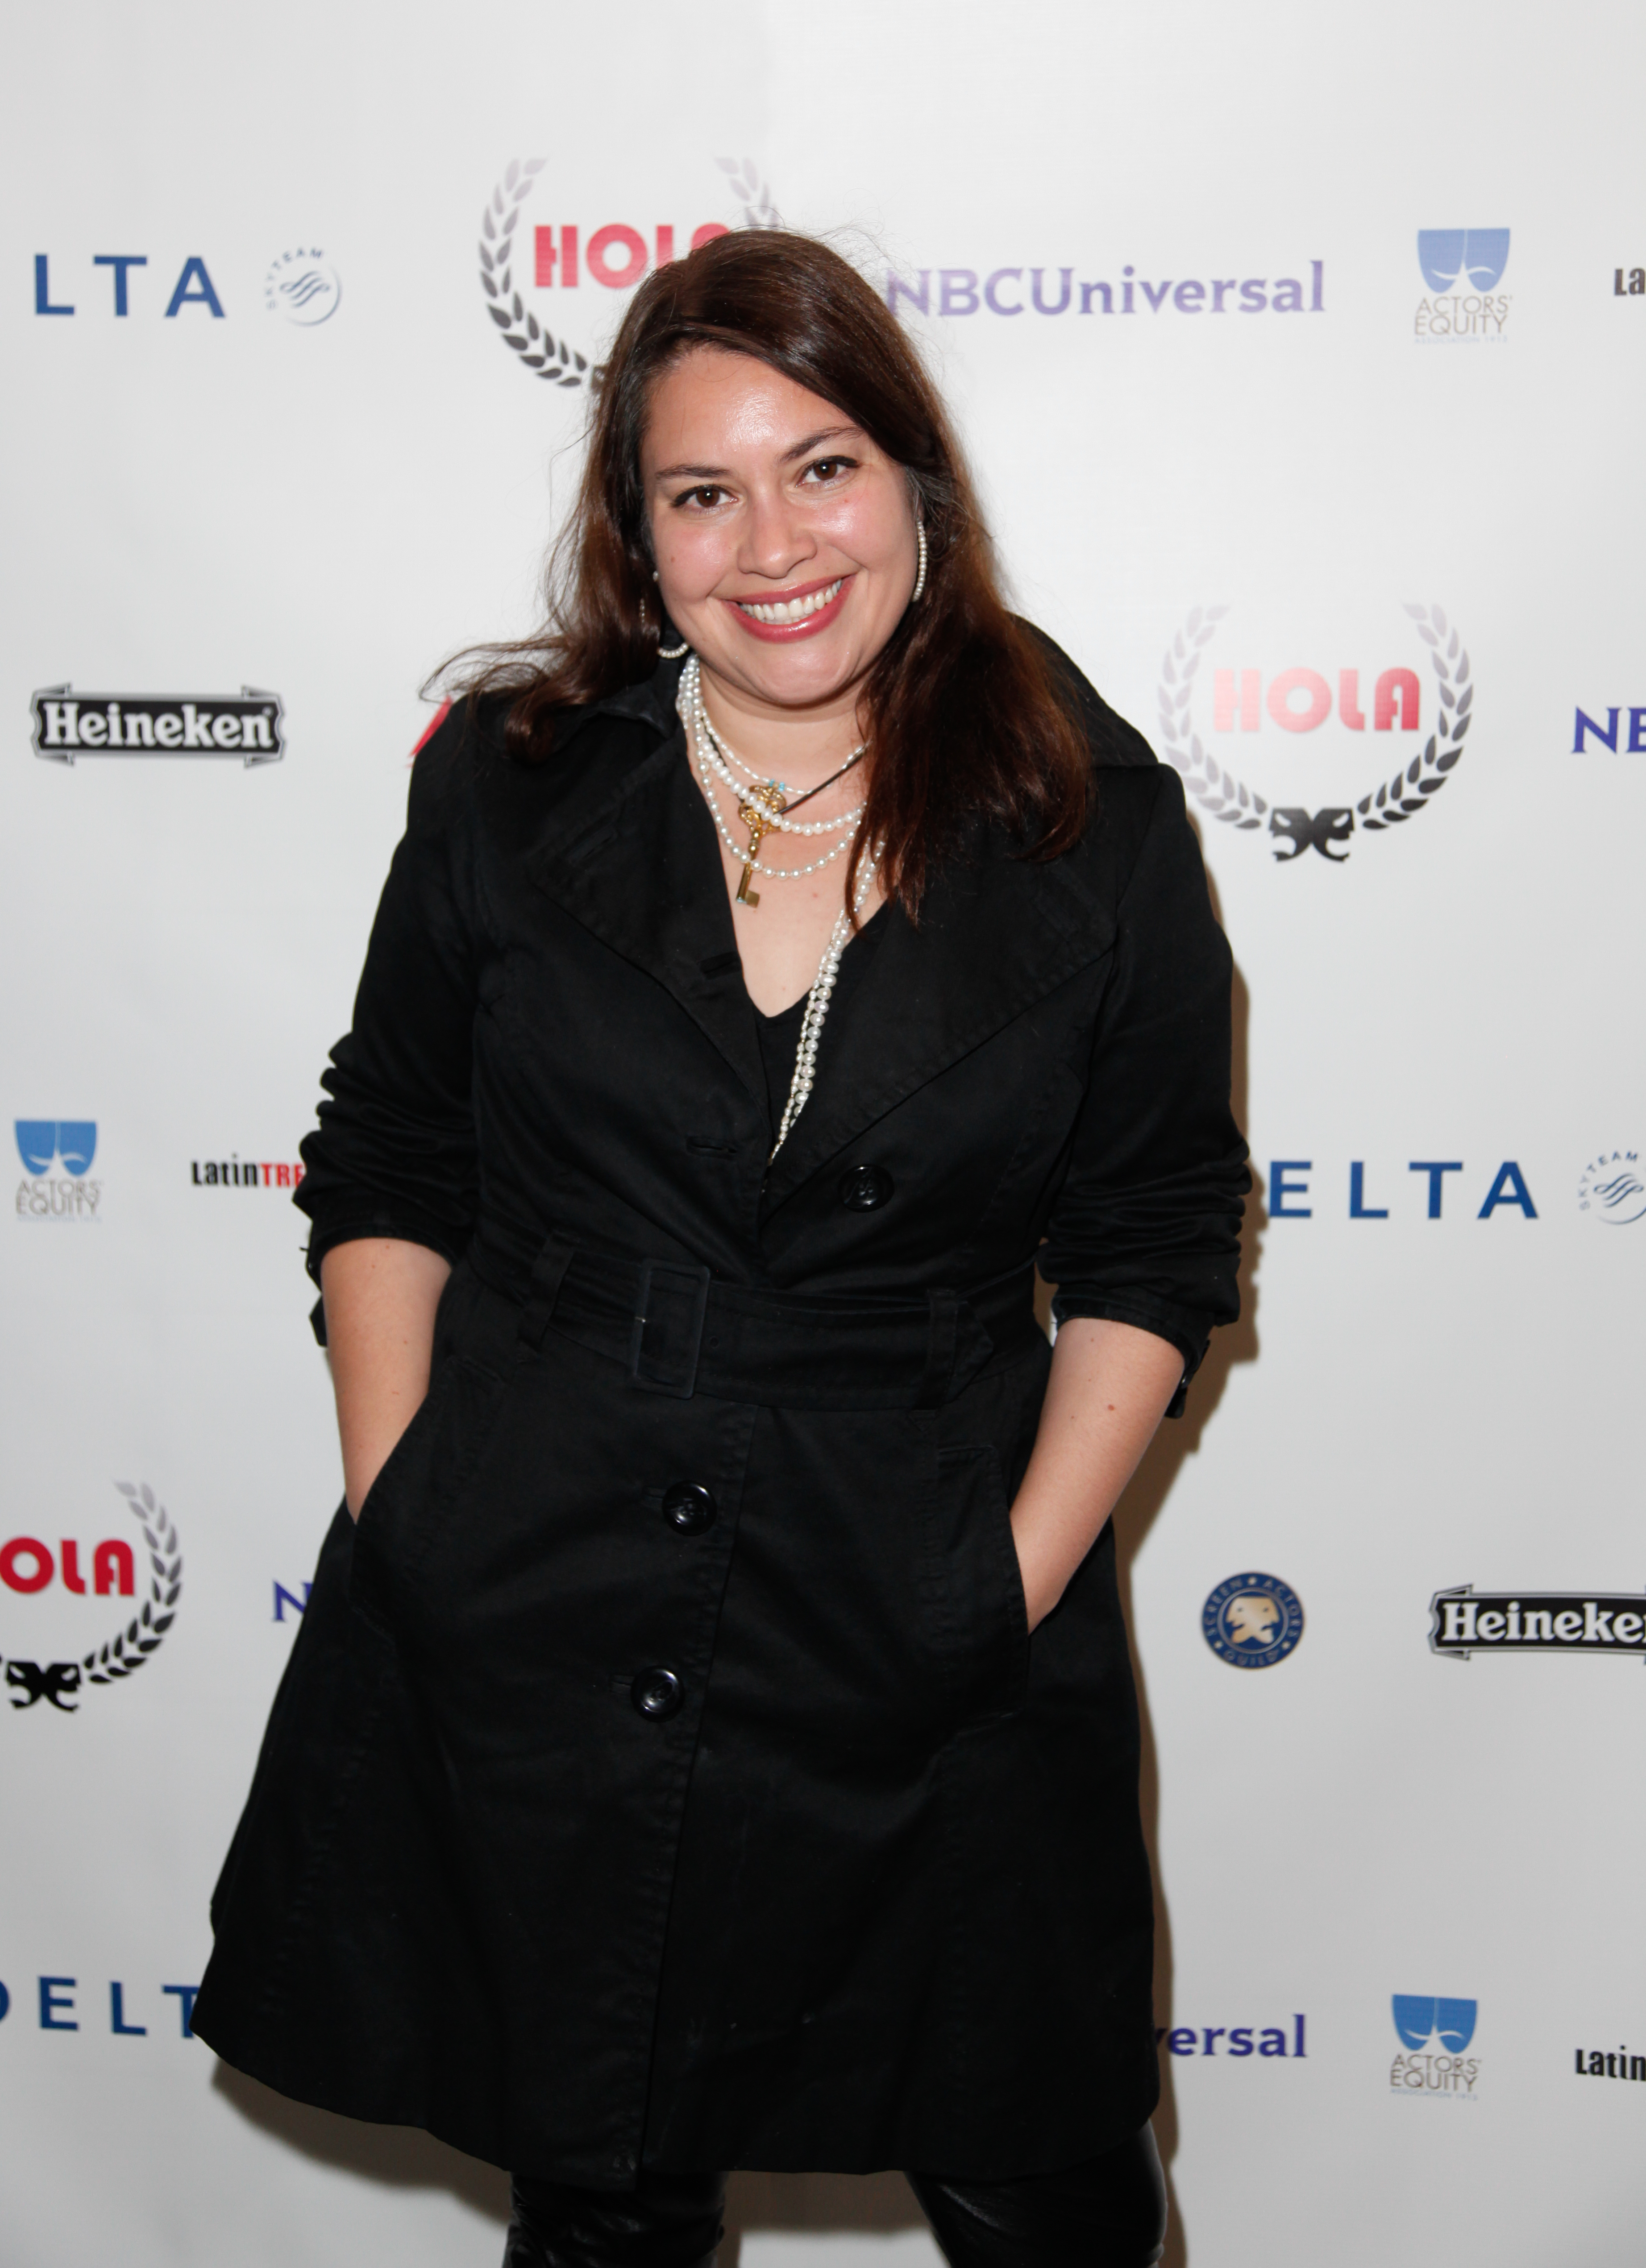 Vanessa Aspillaga recipient of the 2011 HOLA Award for Outstanding Performance by a Female Actor at the HOLA Awards Gala at Battery Park on October 17, 2011 in New York City